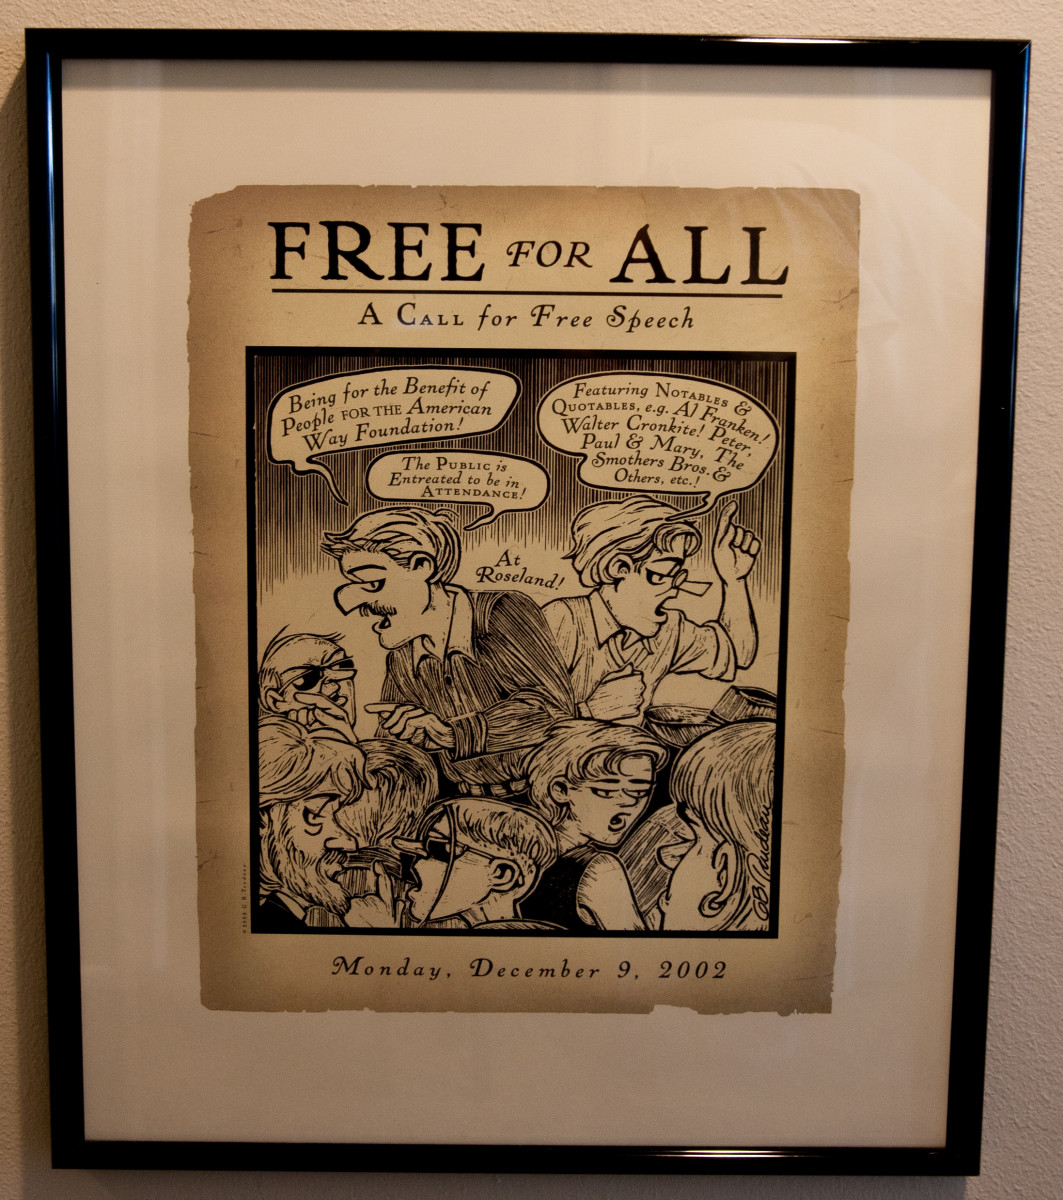 "Free for All" by Garry Trudeau 